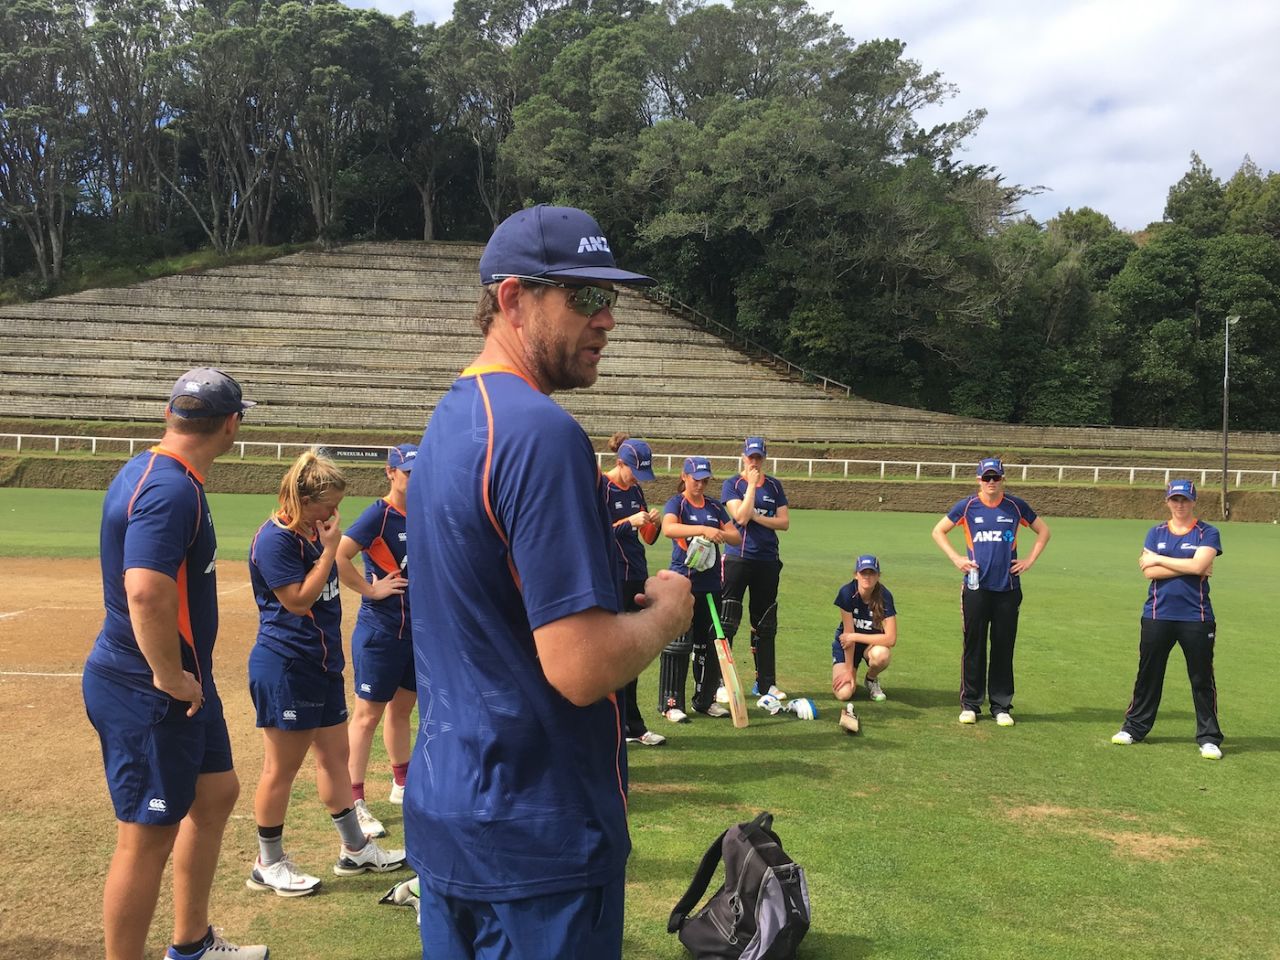 Jacob Oram trains with the New Zealand women's team at Pukekura Park, New Plymouth, March 19, 2018